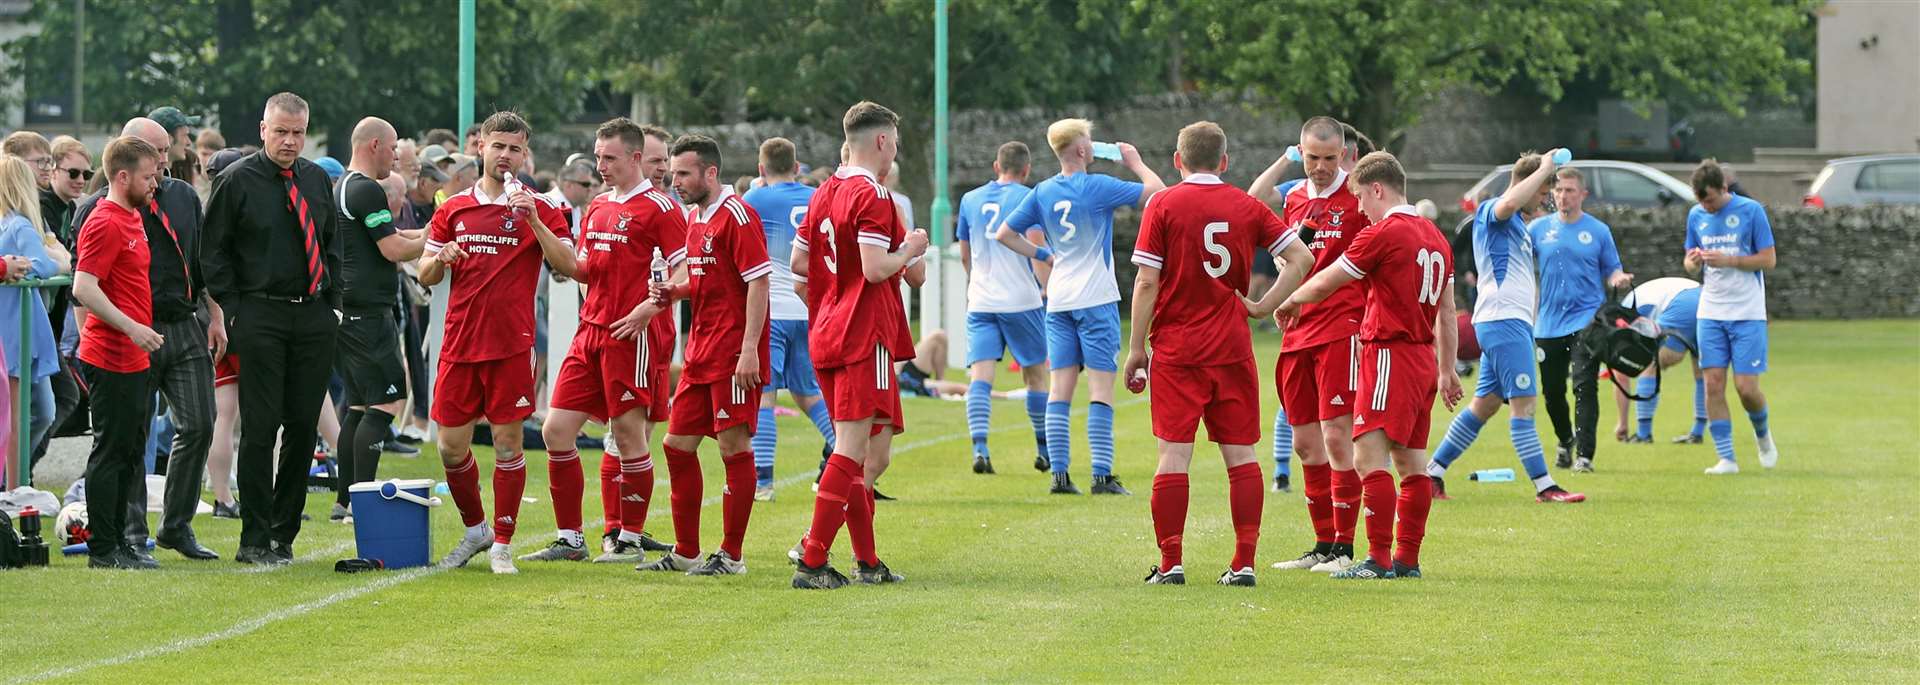 Players from Wick Groats and Wick Thistle take advantage of a water break due to the warm weather – a rare sight in Caithness football. Picture: James Gunn